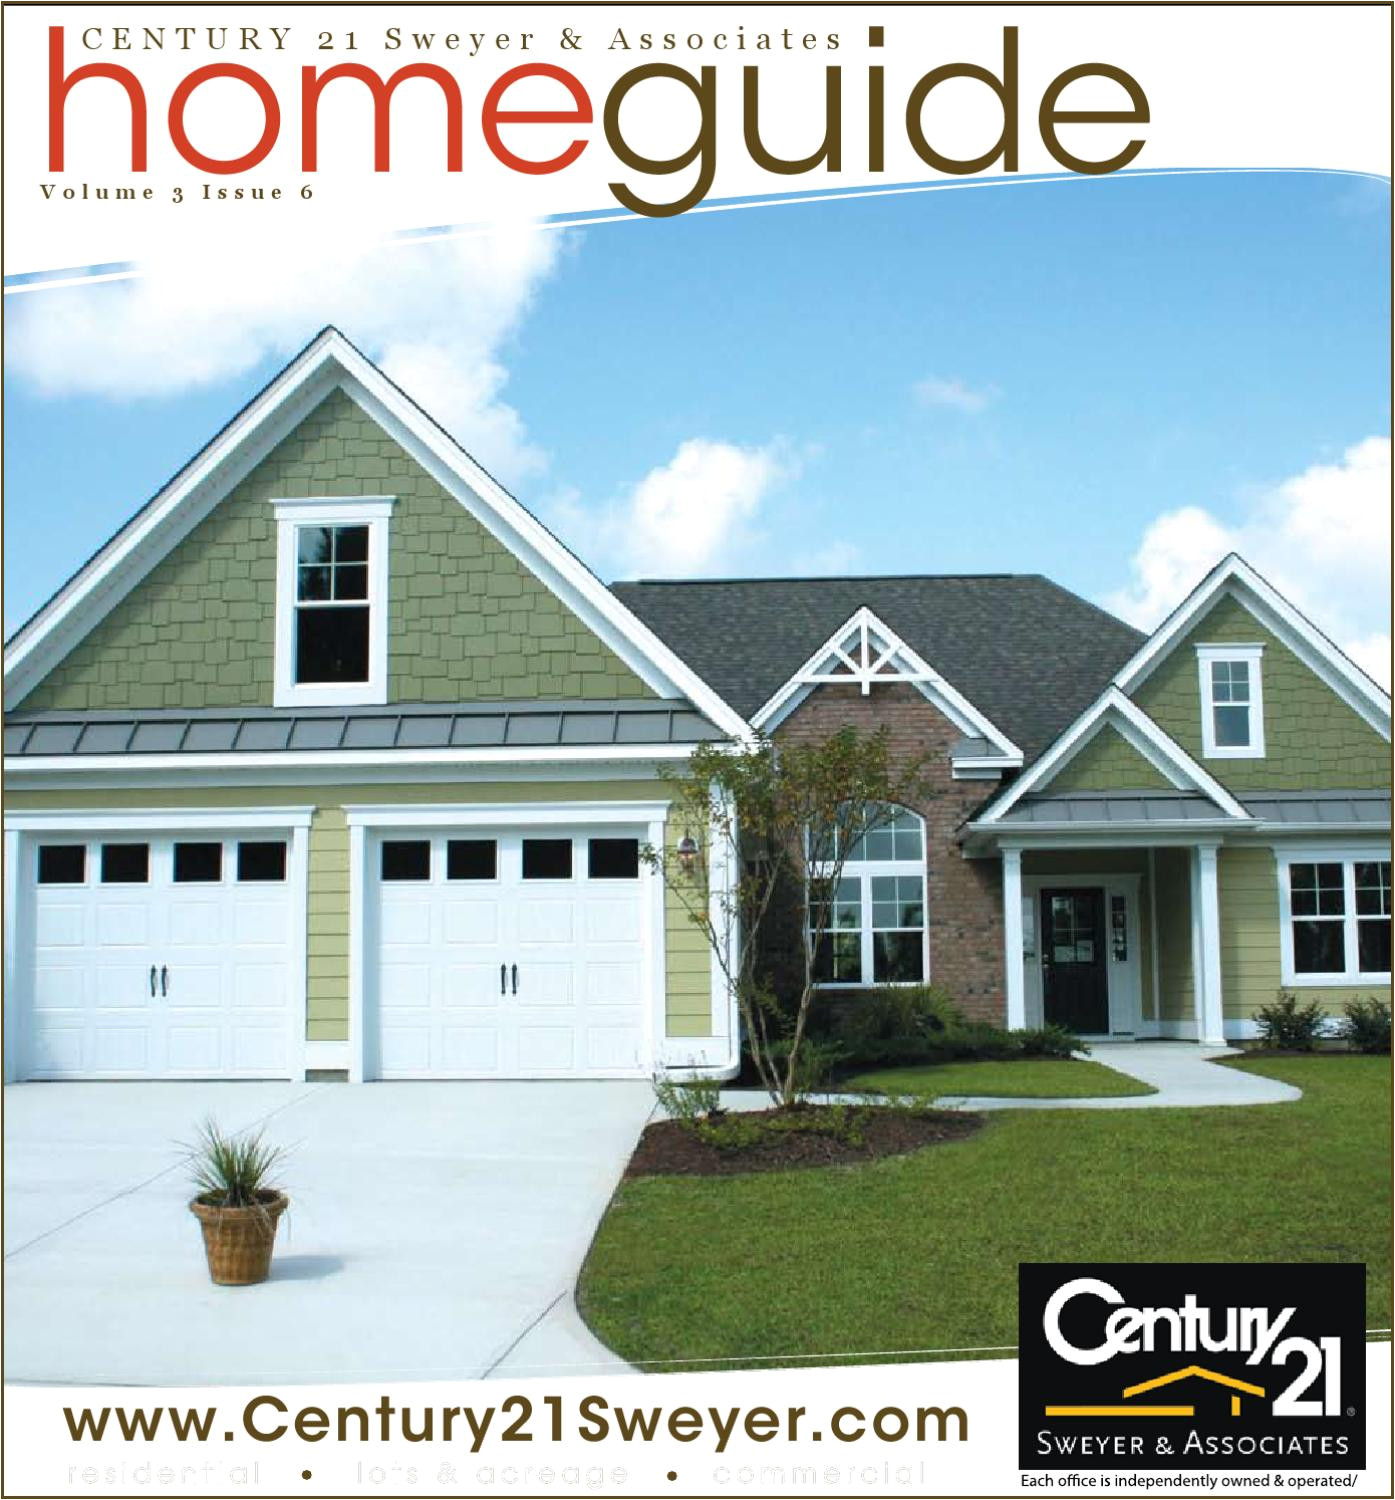 century 21 sweyer associates home guide volume 3 issue 6 wilmington nc real estate by century 21 sweyer associates issuu